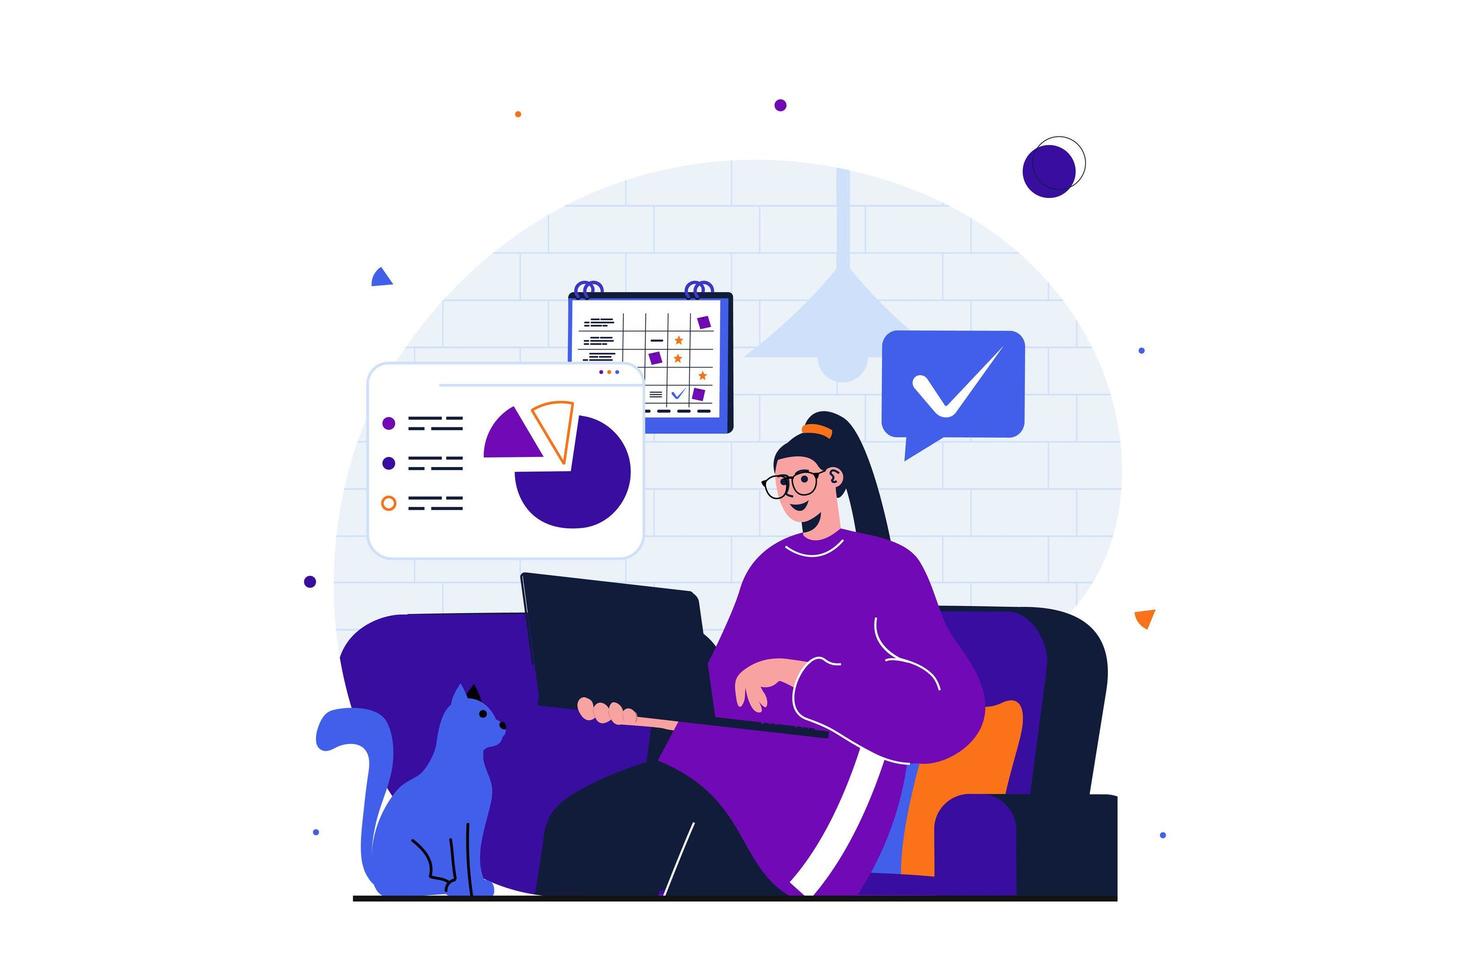 Freelance working modern flat concept for web banner design. Woman manager works remotely, completes tasks before deadline while sitting in living room. Vector illustration with isolated people scene